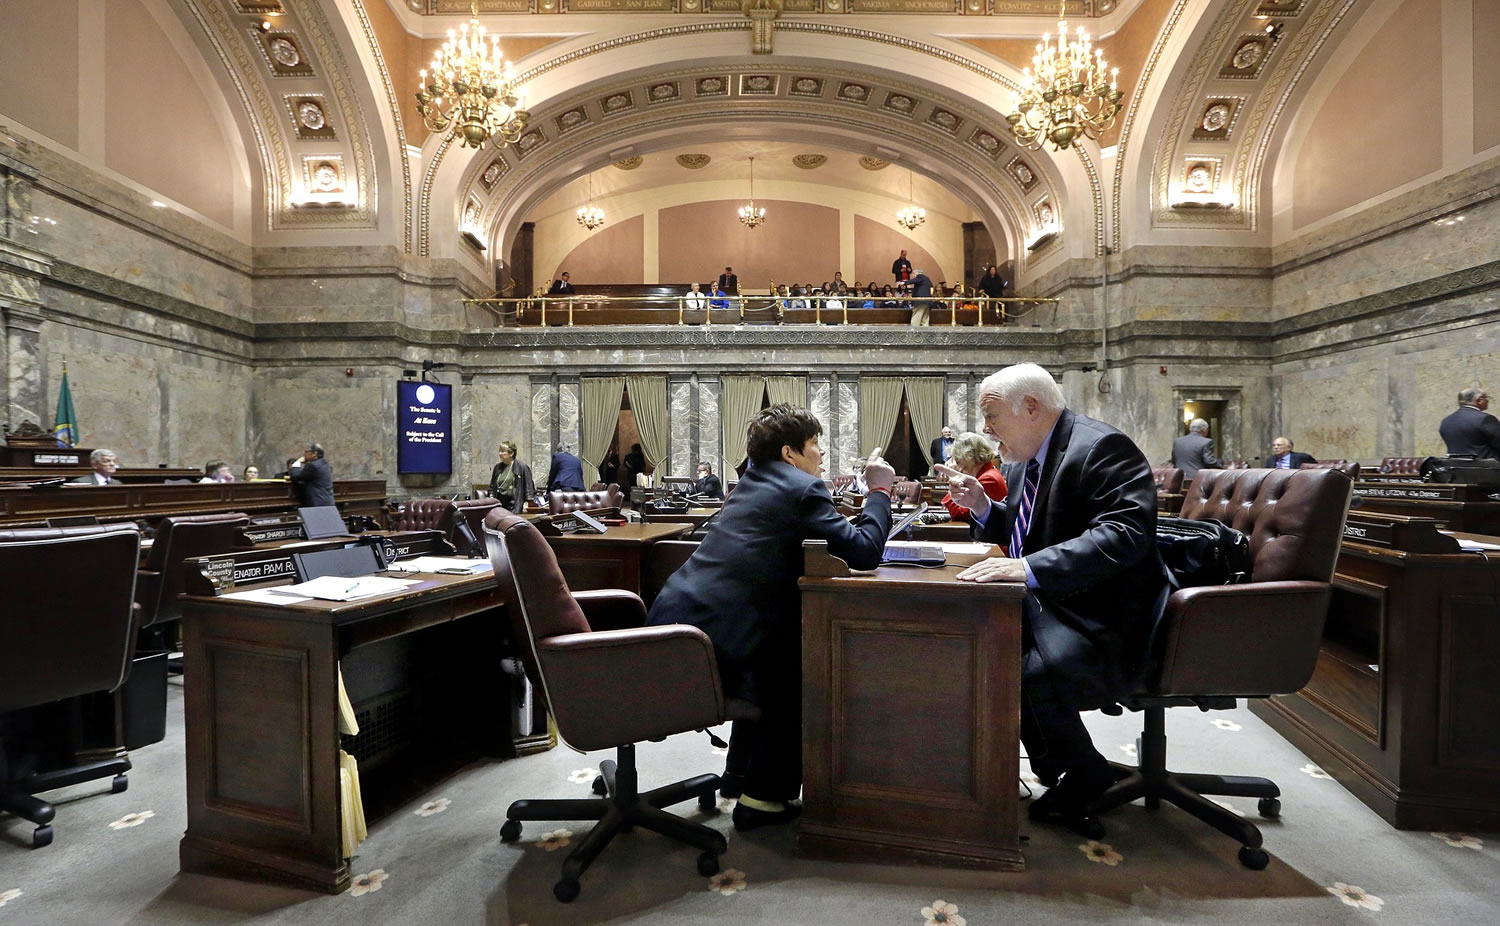 Sen. Pam Roach, R-Auburn, left, and Sen. Don Benton, R-Vancouver,  sit on the Senate floor and talk during a break on the first day of a 30-day special session of the Legislature Wednesday, April 29, 2015, in Olympia, Wash.